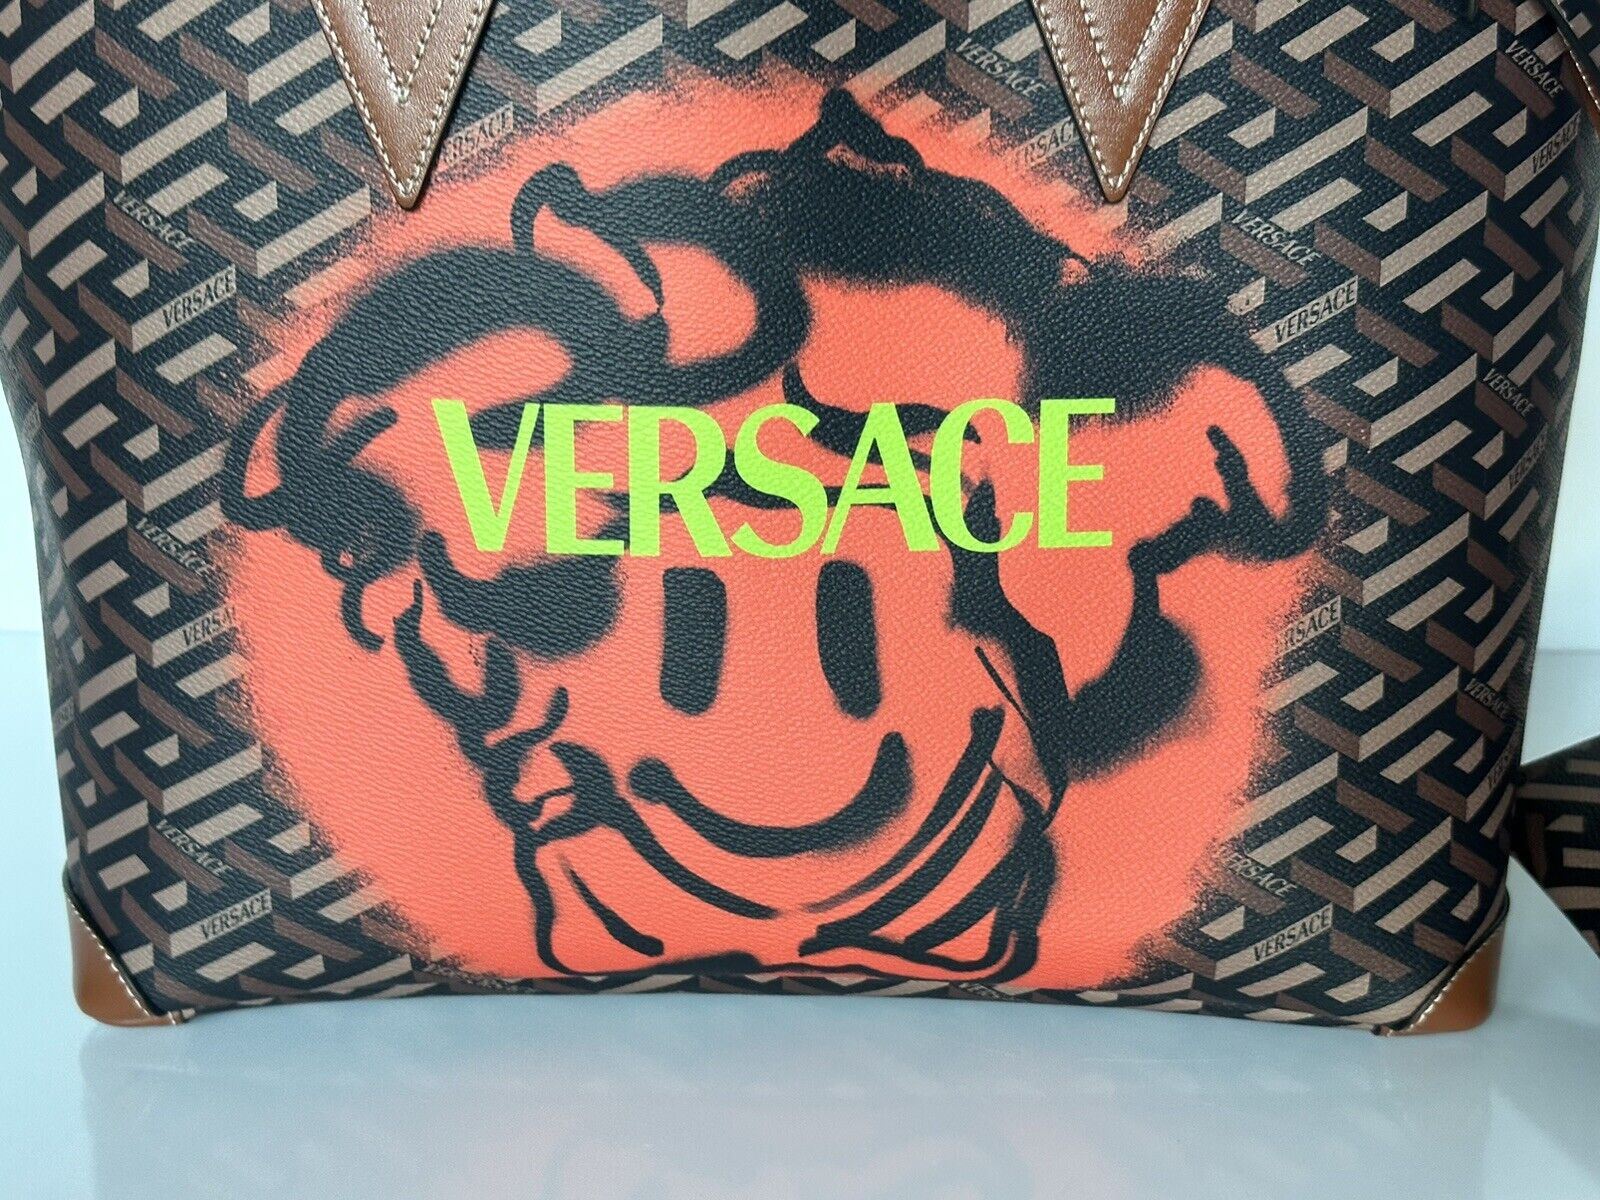 NWT Versace Greca Signature Smiley Medusa Tote Bag Removable Pouch IT 1008109